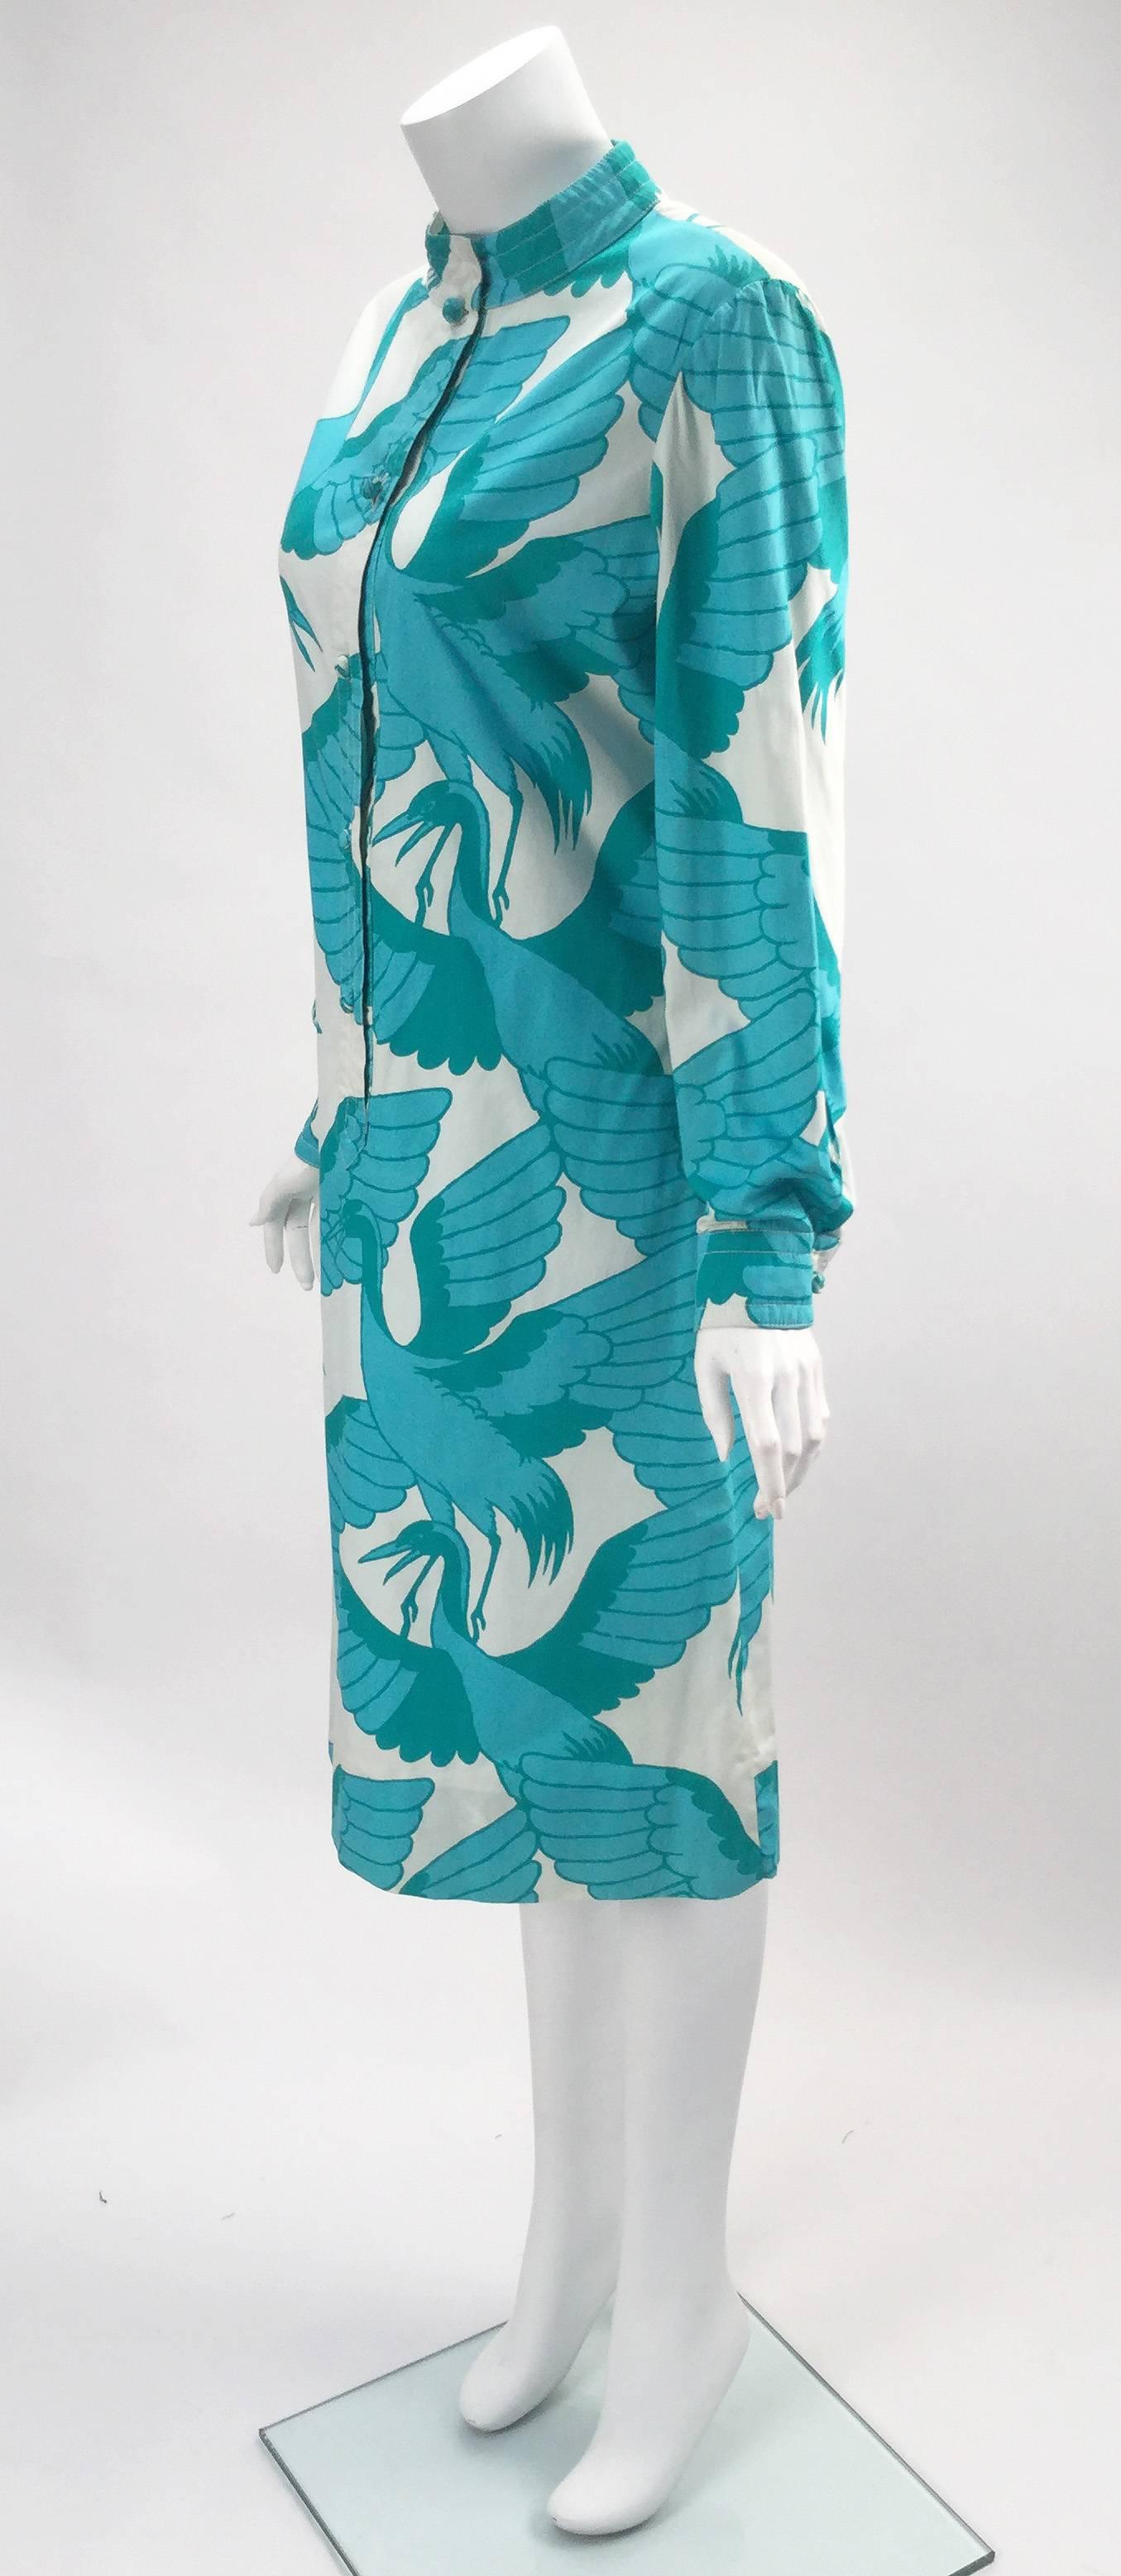 Fantastic 1970s Saks Fifth Avenue cotton knee length shirt dress with blue cranes print made in Thailand.  Placket on center front goes just past the waist and goes up to the mandarin collar. The buttons stop at the waist, cuffs on the long sleeves